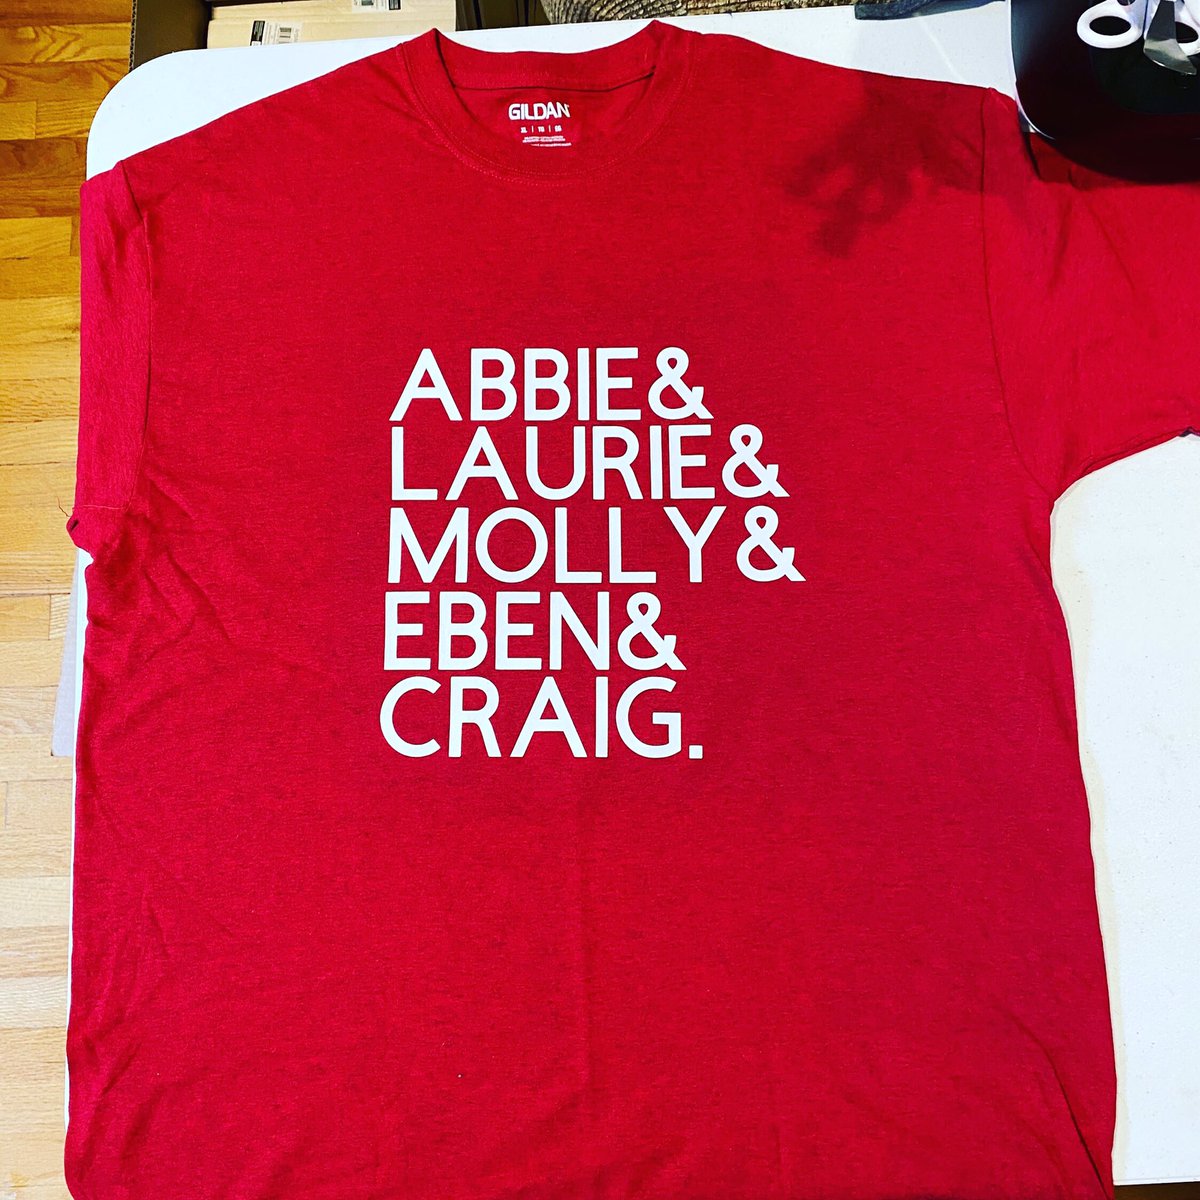 Ooooo! With all this time at home, RM fans are getting CRAFTY - our friend Stacy Ricco made this BOOTLEG RED MOLLY T-SHIRT! We love it so much 😍 And we miss you all ❤️